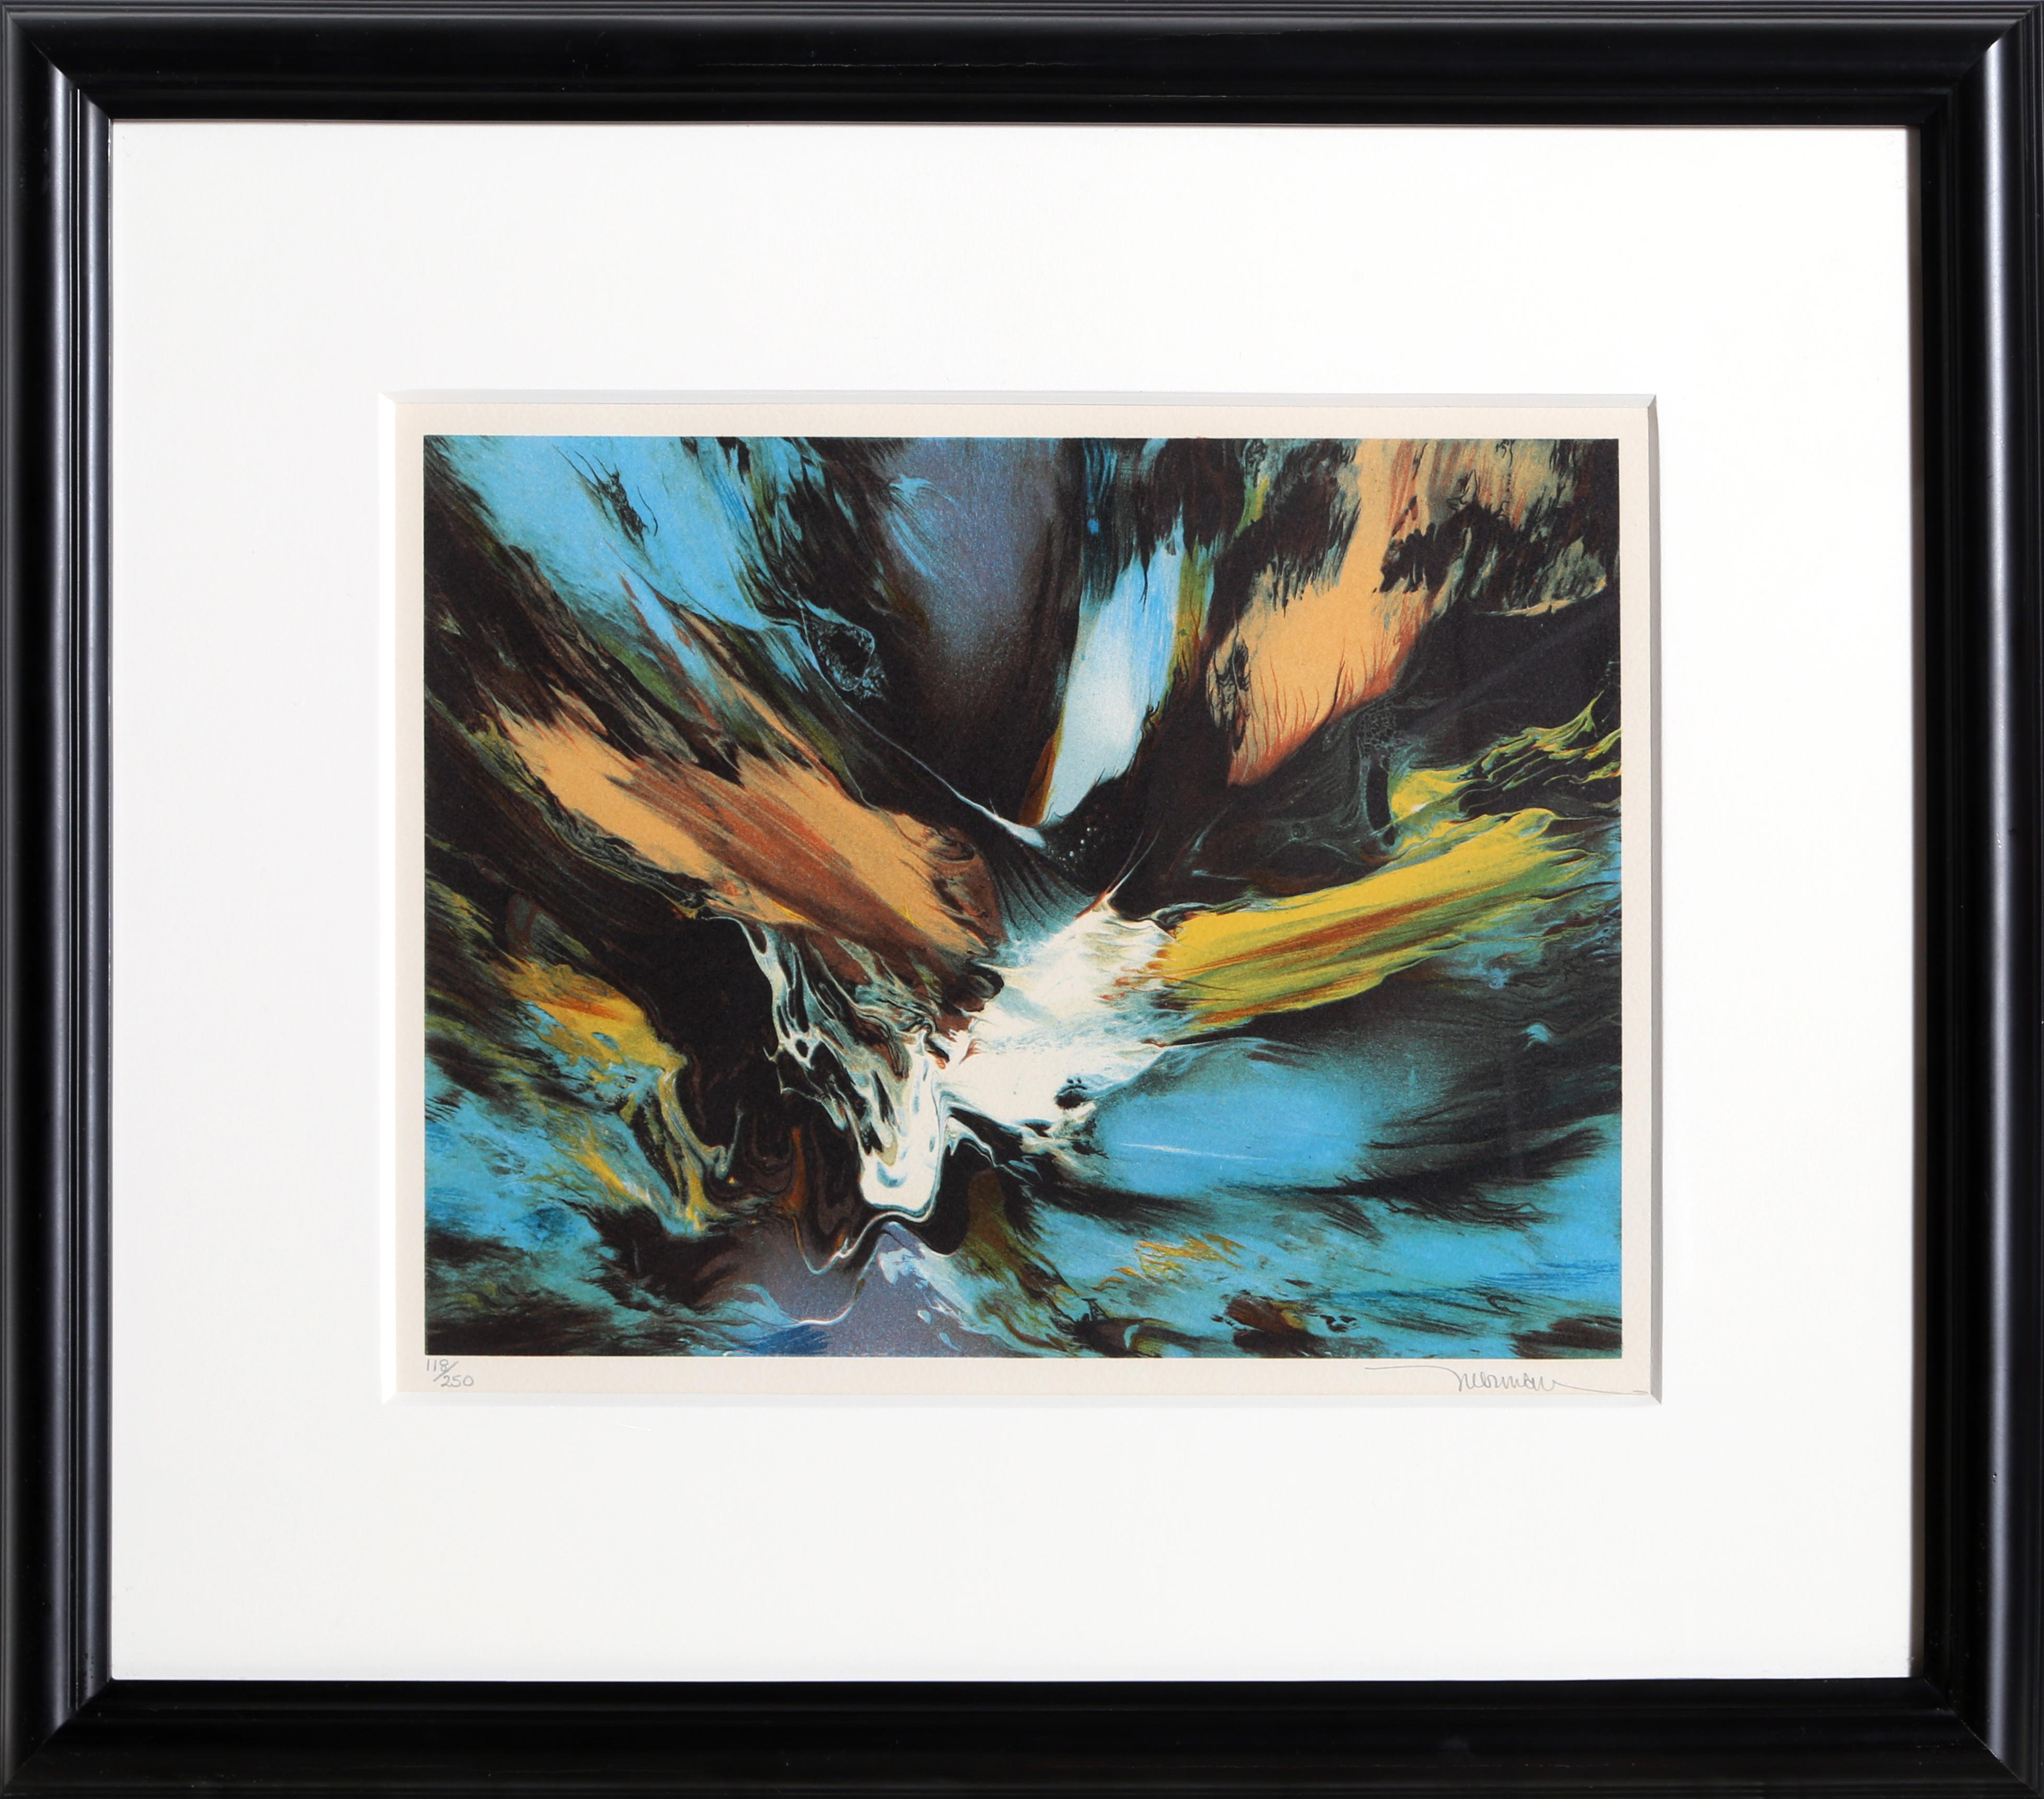 A cosmic abstract lithograph by Mexican artist, Leonardo Nierman. The print is hand-signed and numbered in pencil. Nicely framed. 

Abstraction 1
Leonardo Nierman, Mexican (1932)
Lithograph, signed and numbered in pencil
Edition of 118/250
Image